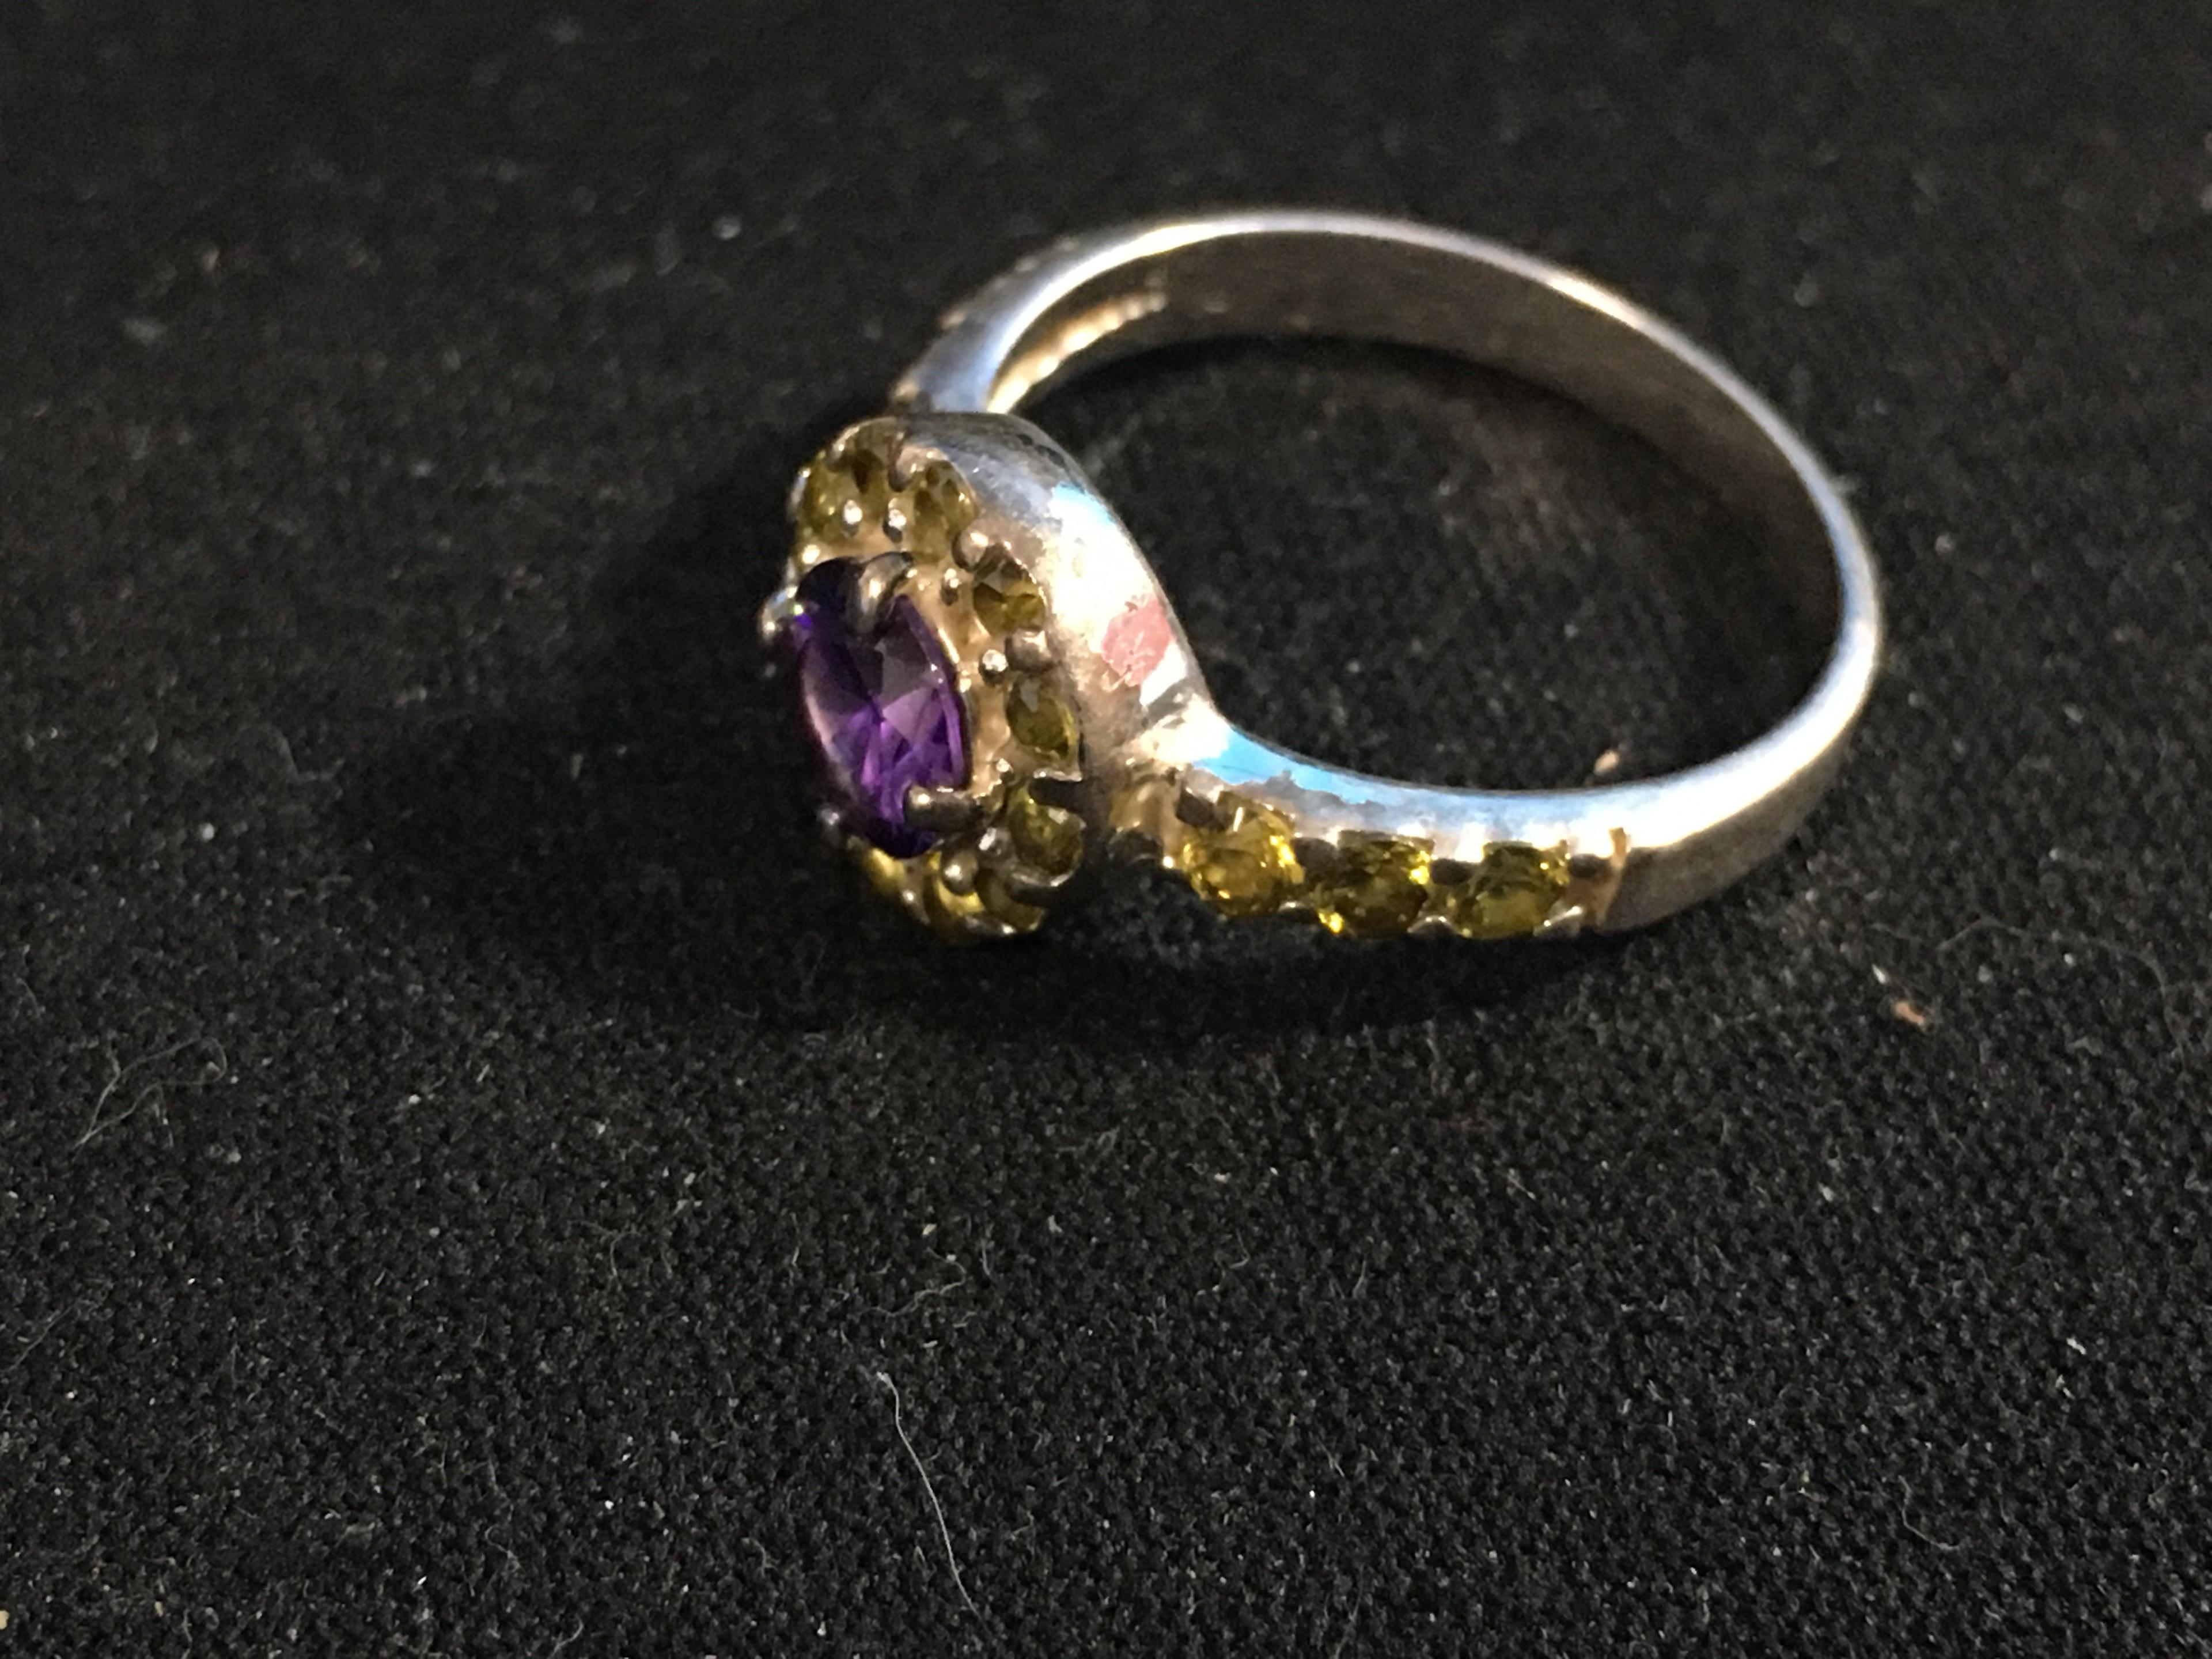 Citrine & Amethyst Sterling Silver Ring - Size 7.75